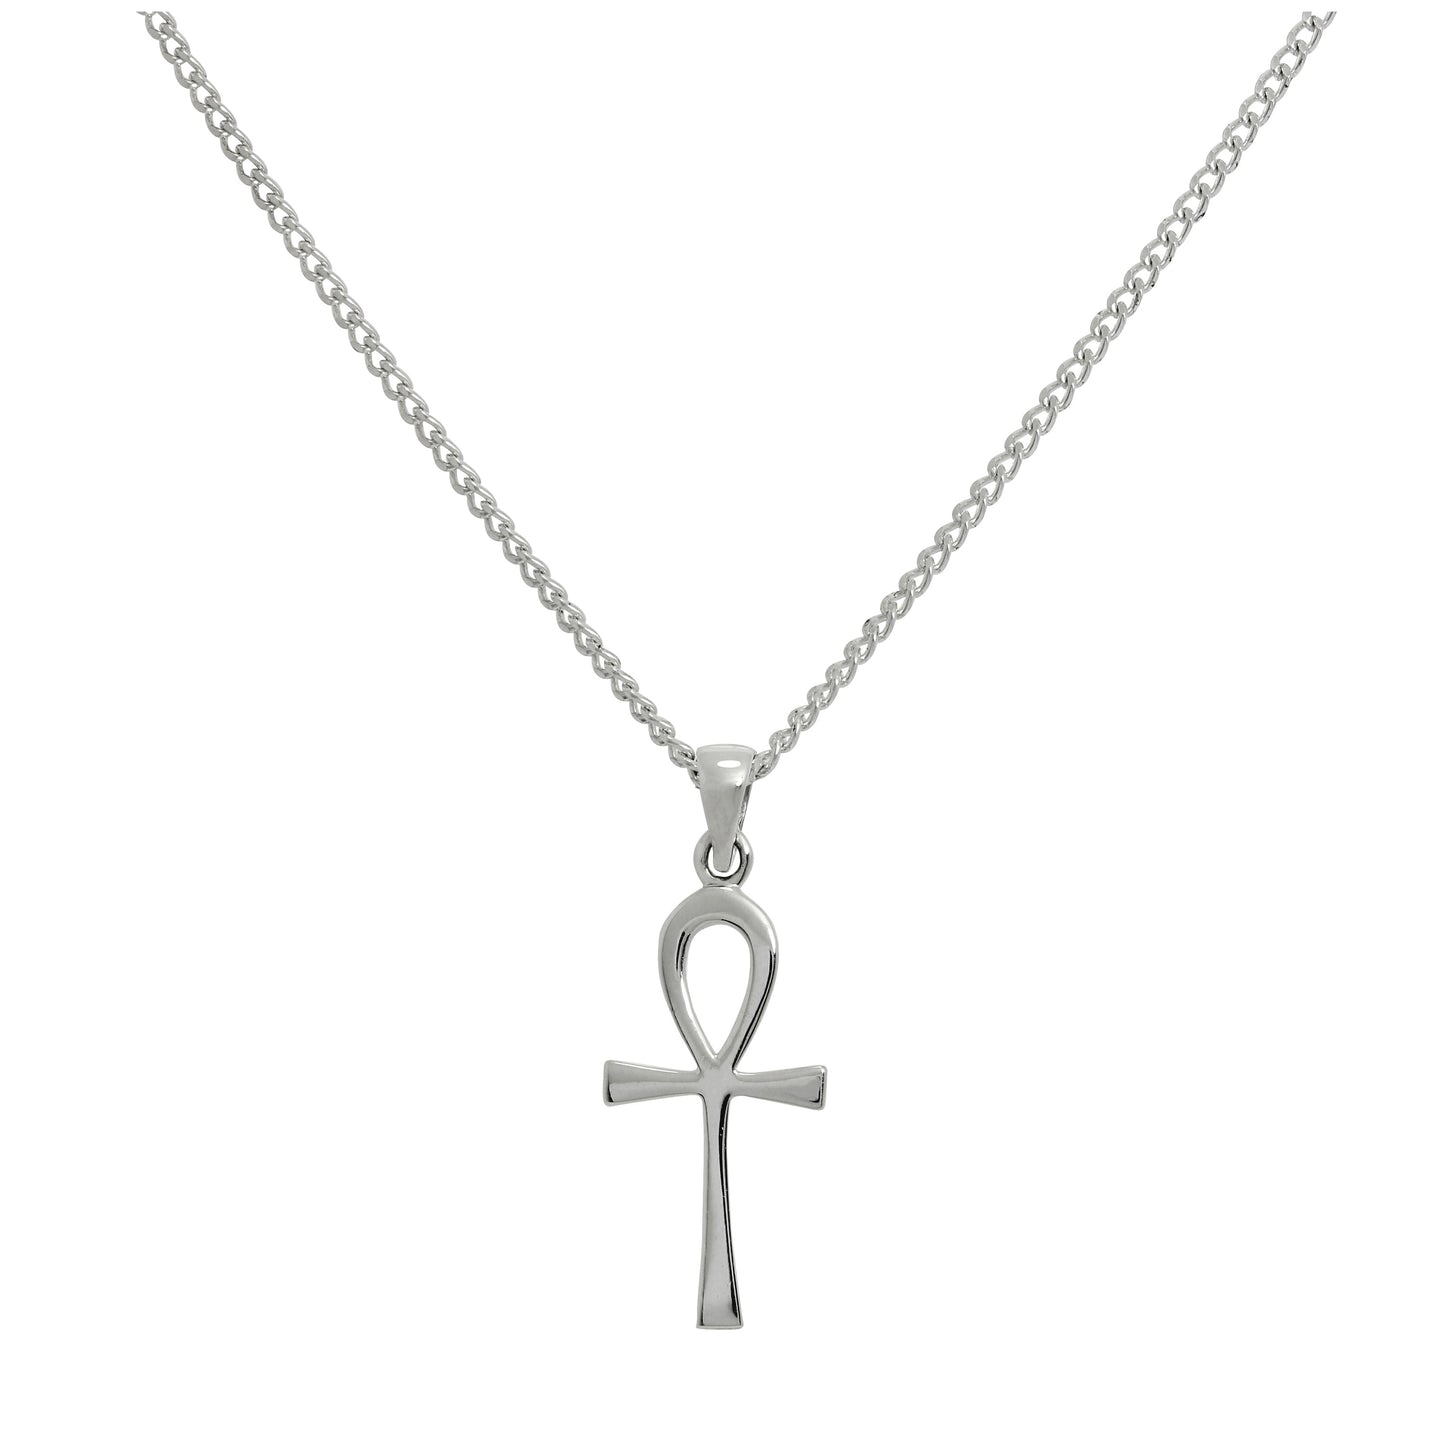 Large Sterling Silver Ankh Pendant Necklace 16 - 24 Inches